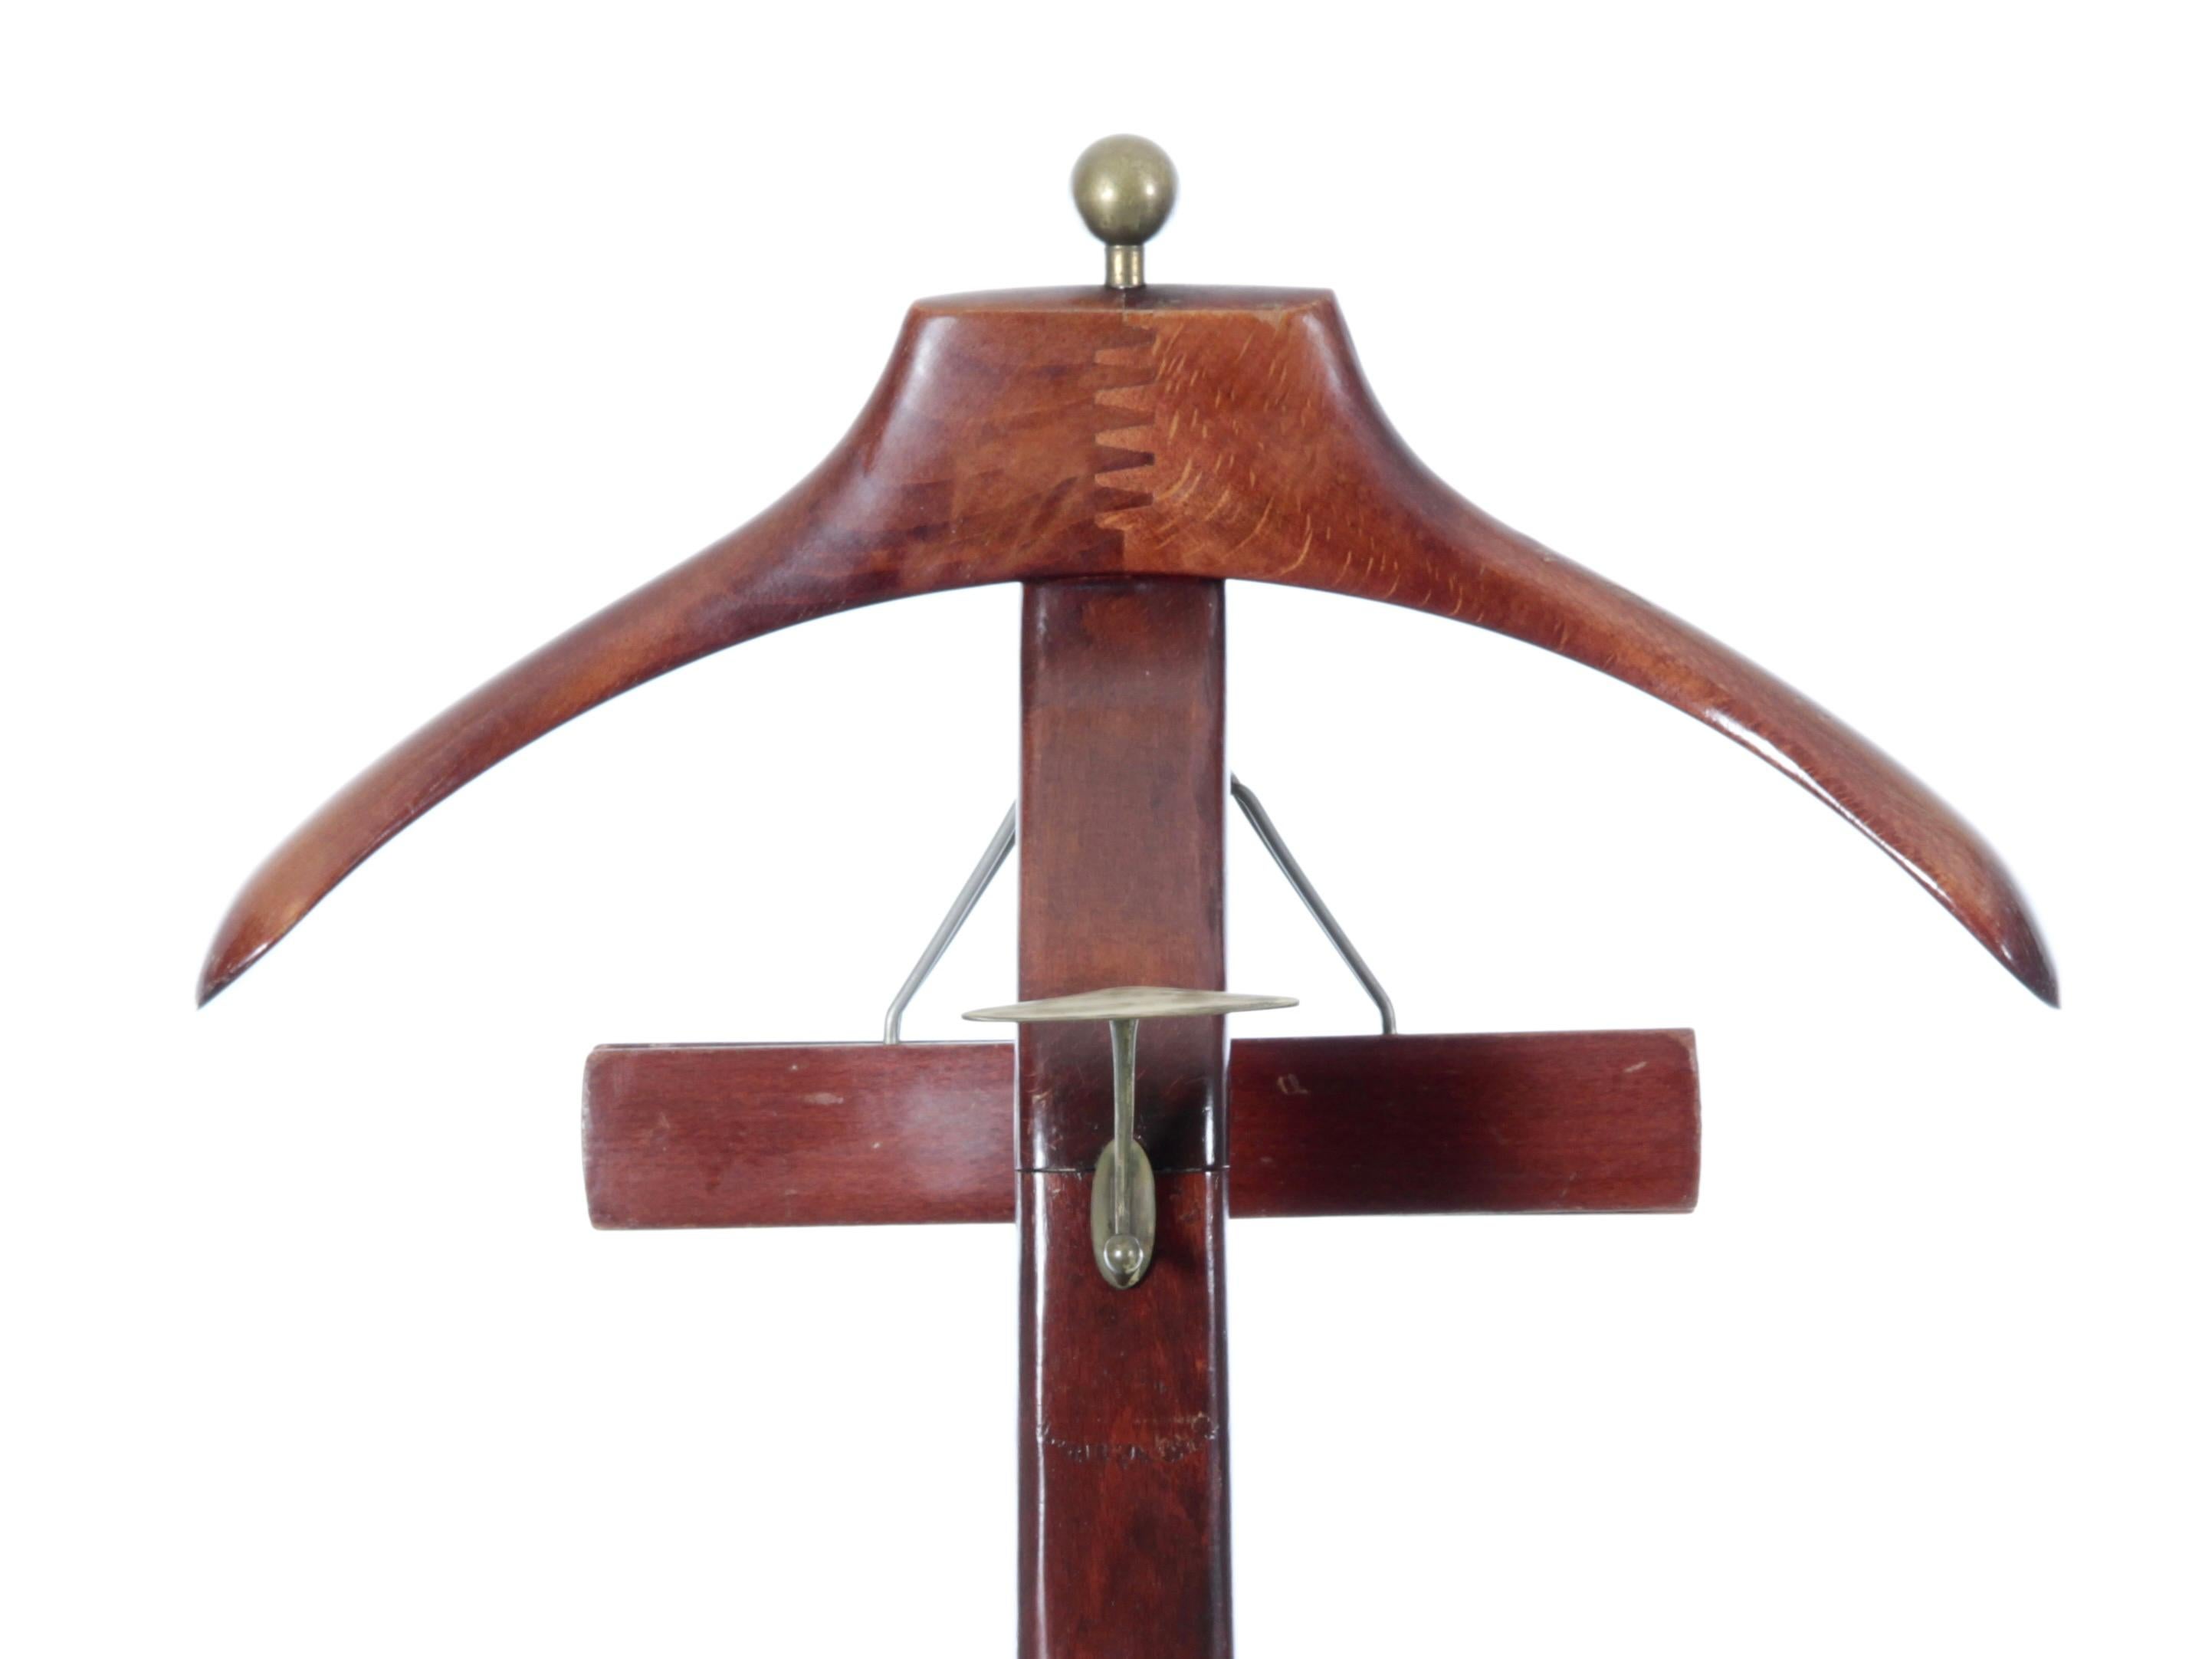 Mid-Century Modern valet clothes Stand designed by Ico Parisi during the 1950s. Manufacturerd in Italy by Fratelli Reguitti, the Stand is made of beech wood.